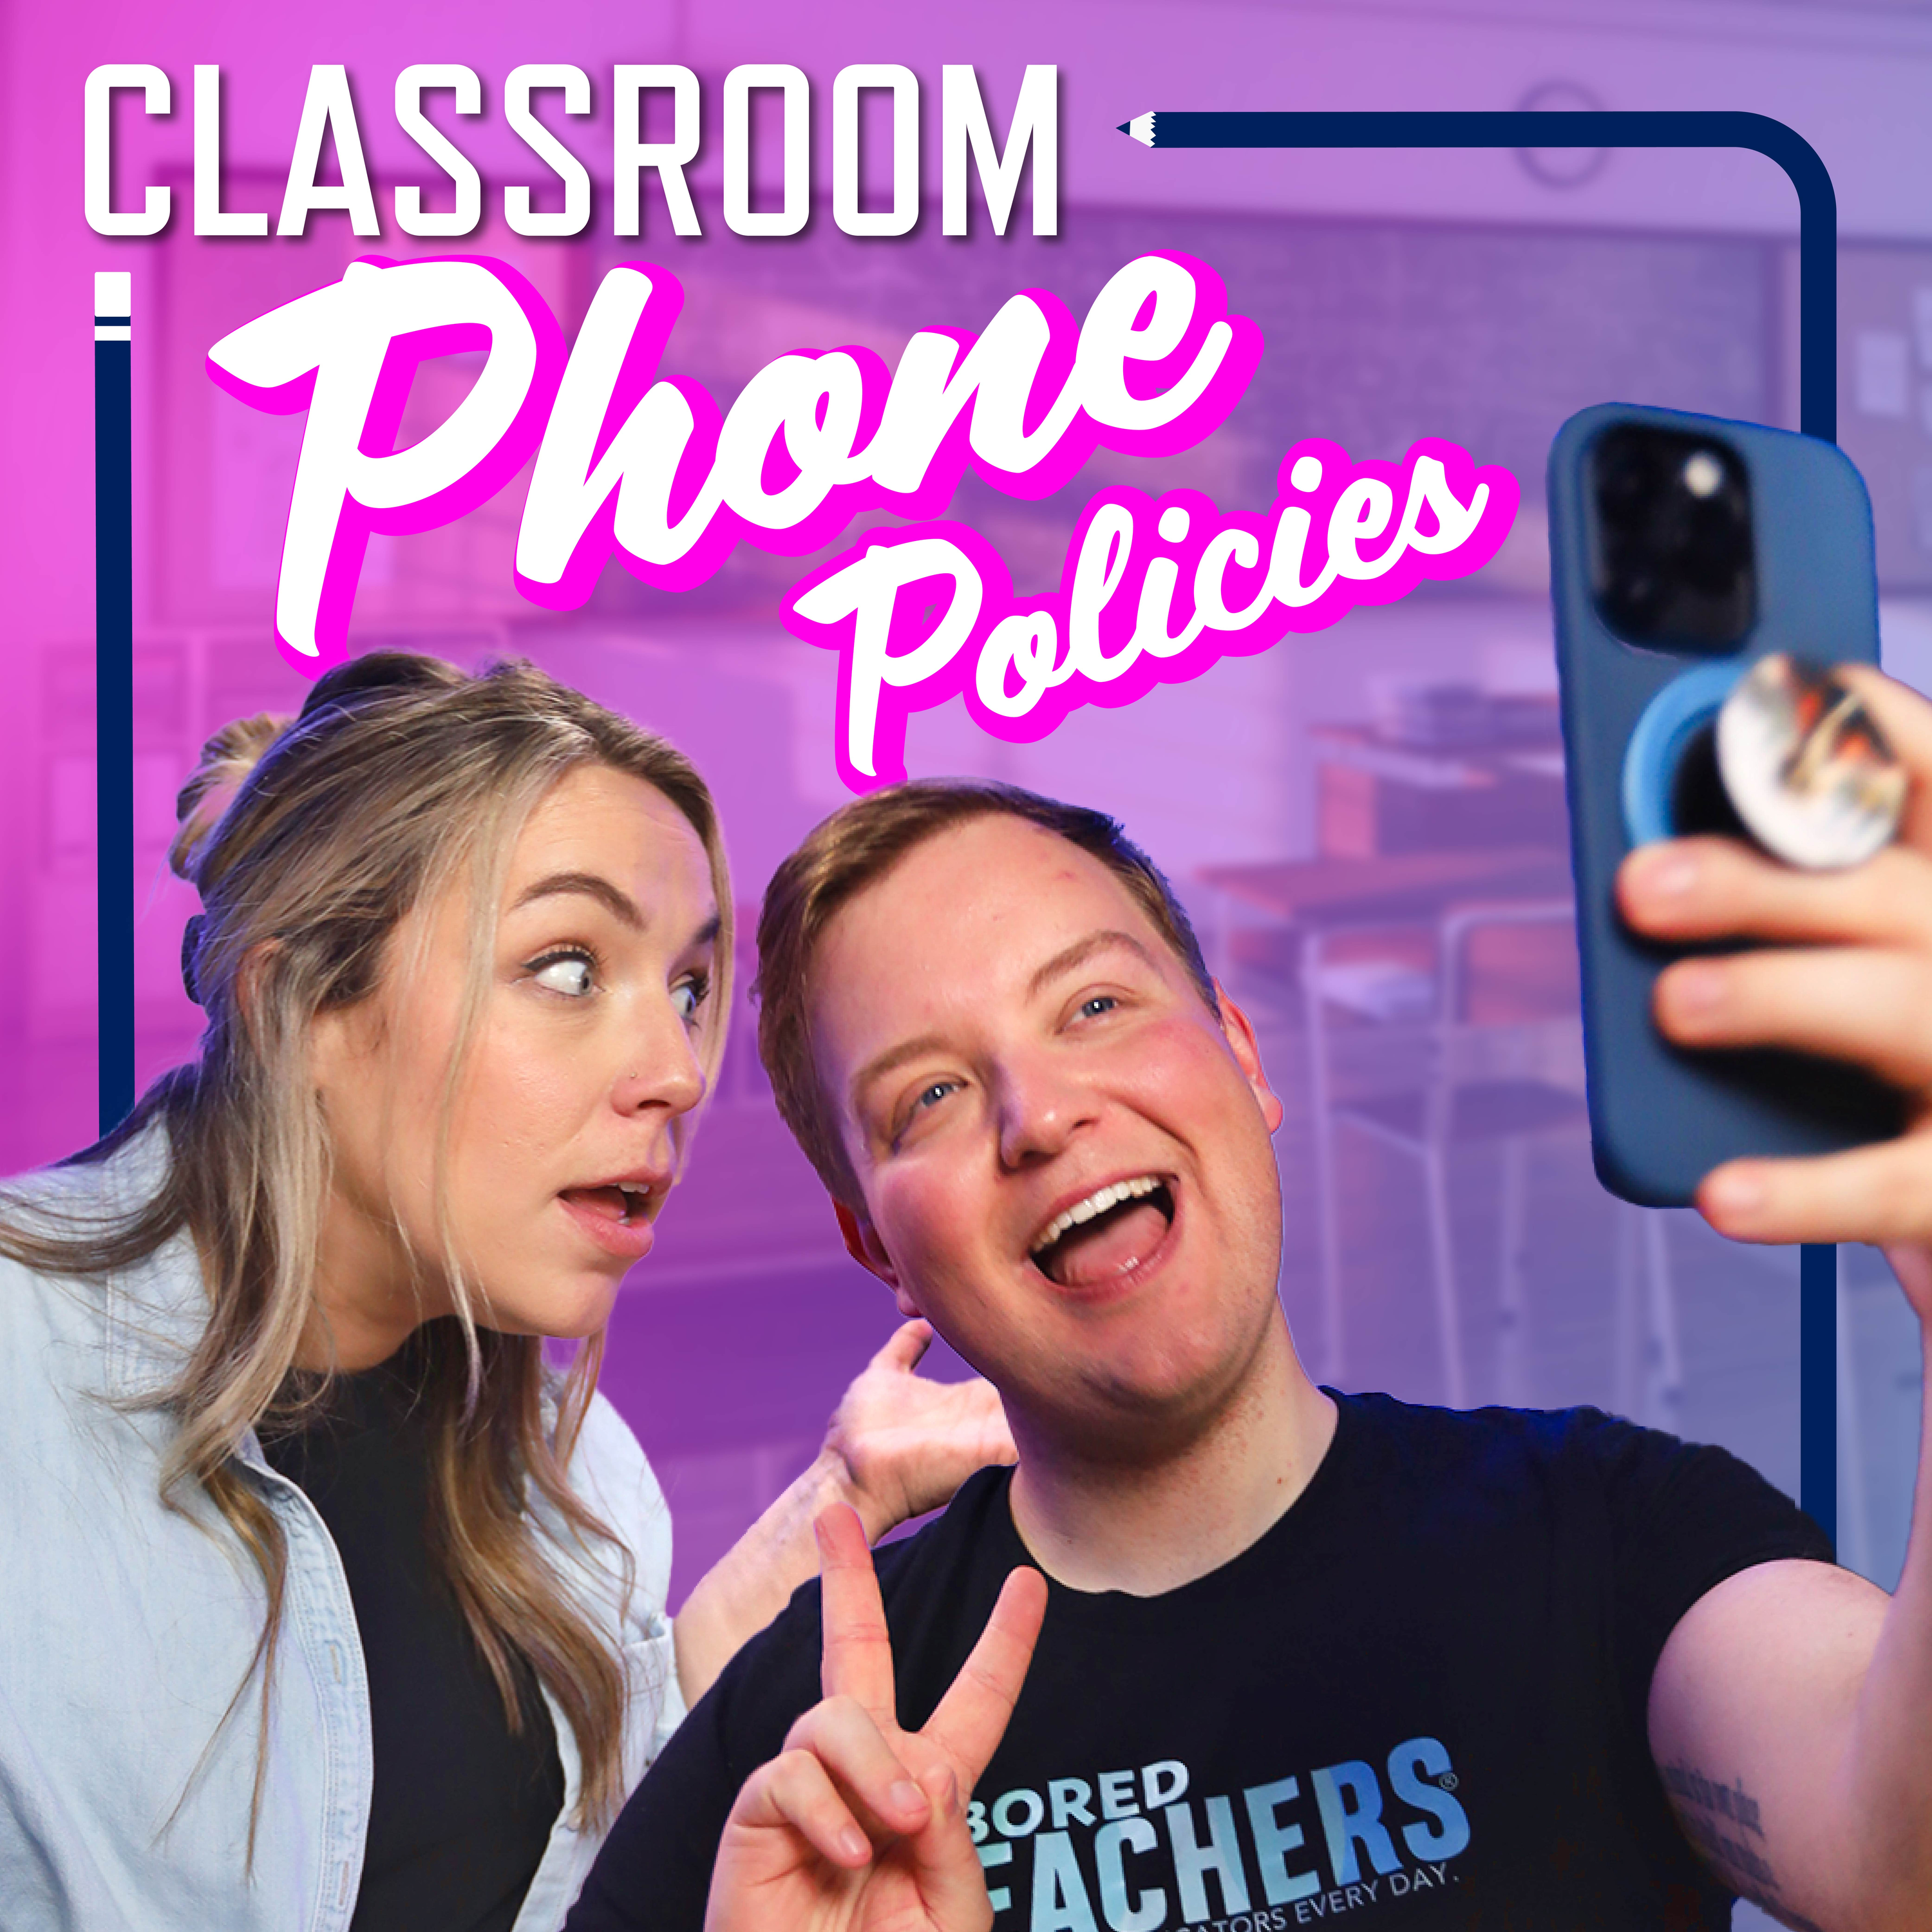 What Are Your Classroom Phone Policies?